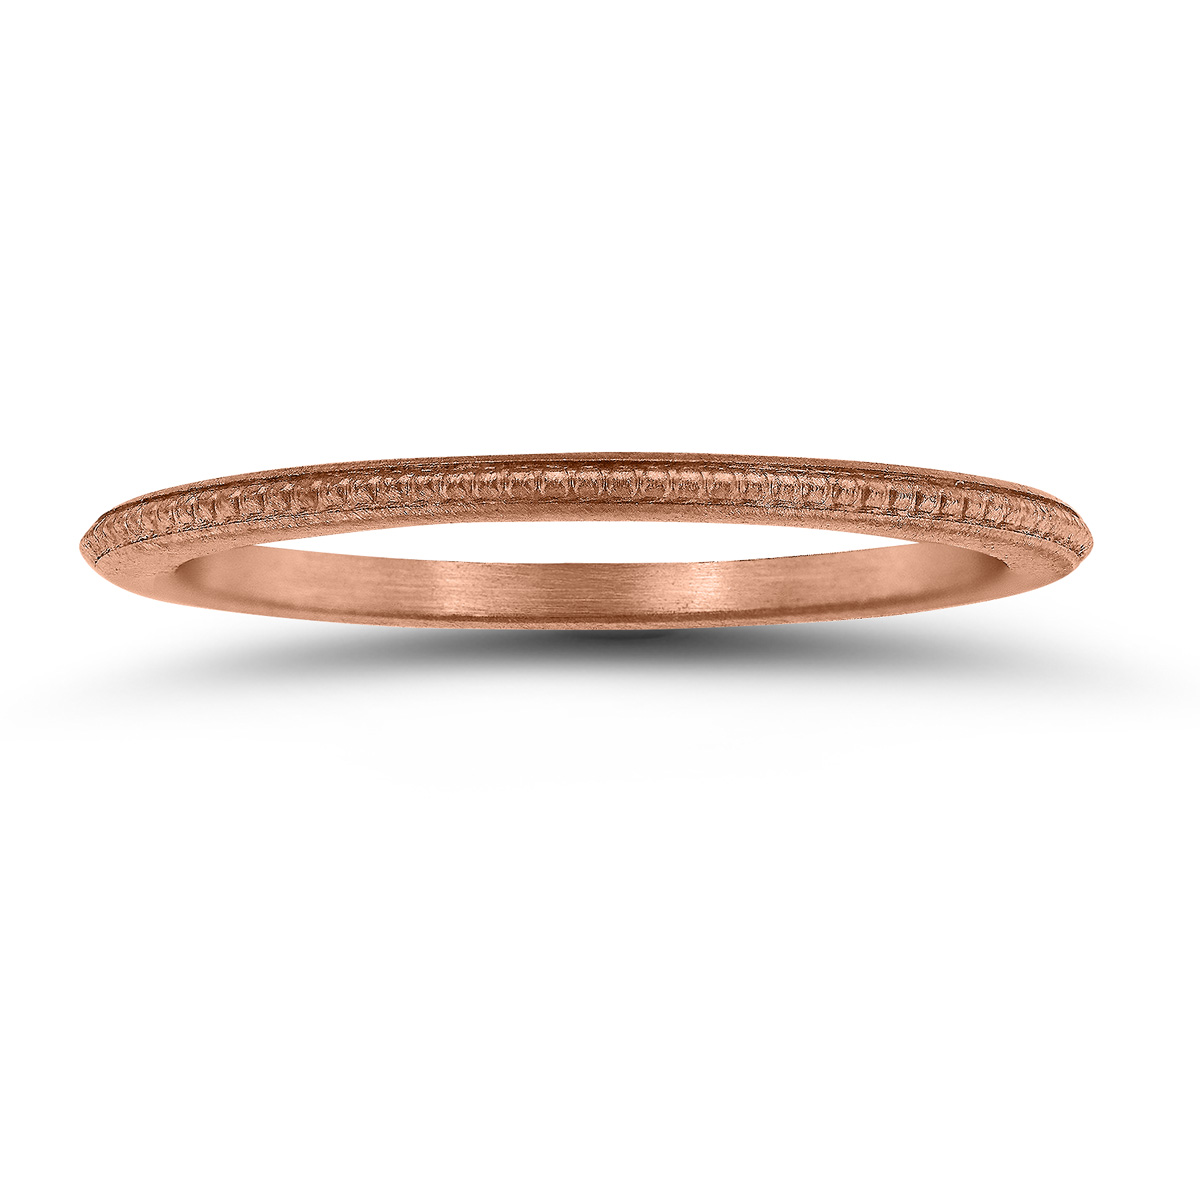 1MM Coin Edge Thin Wedding Band in 14K Rose Gold